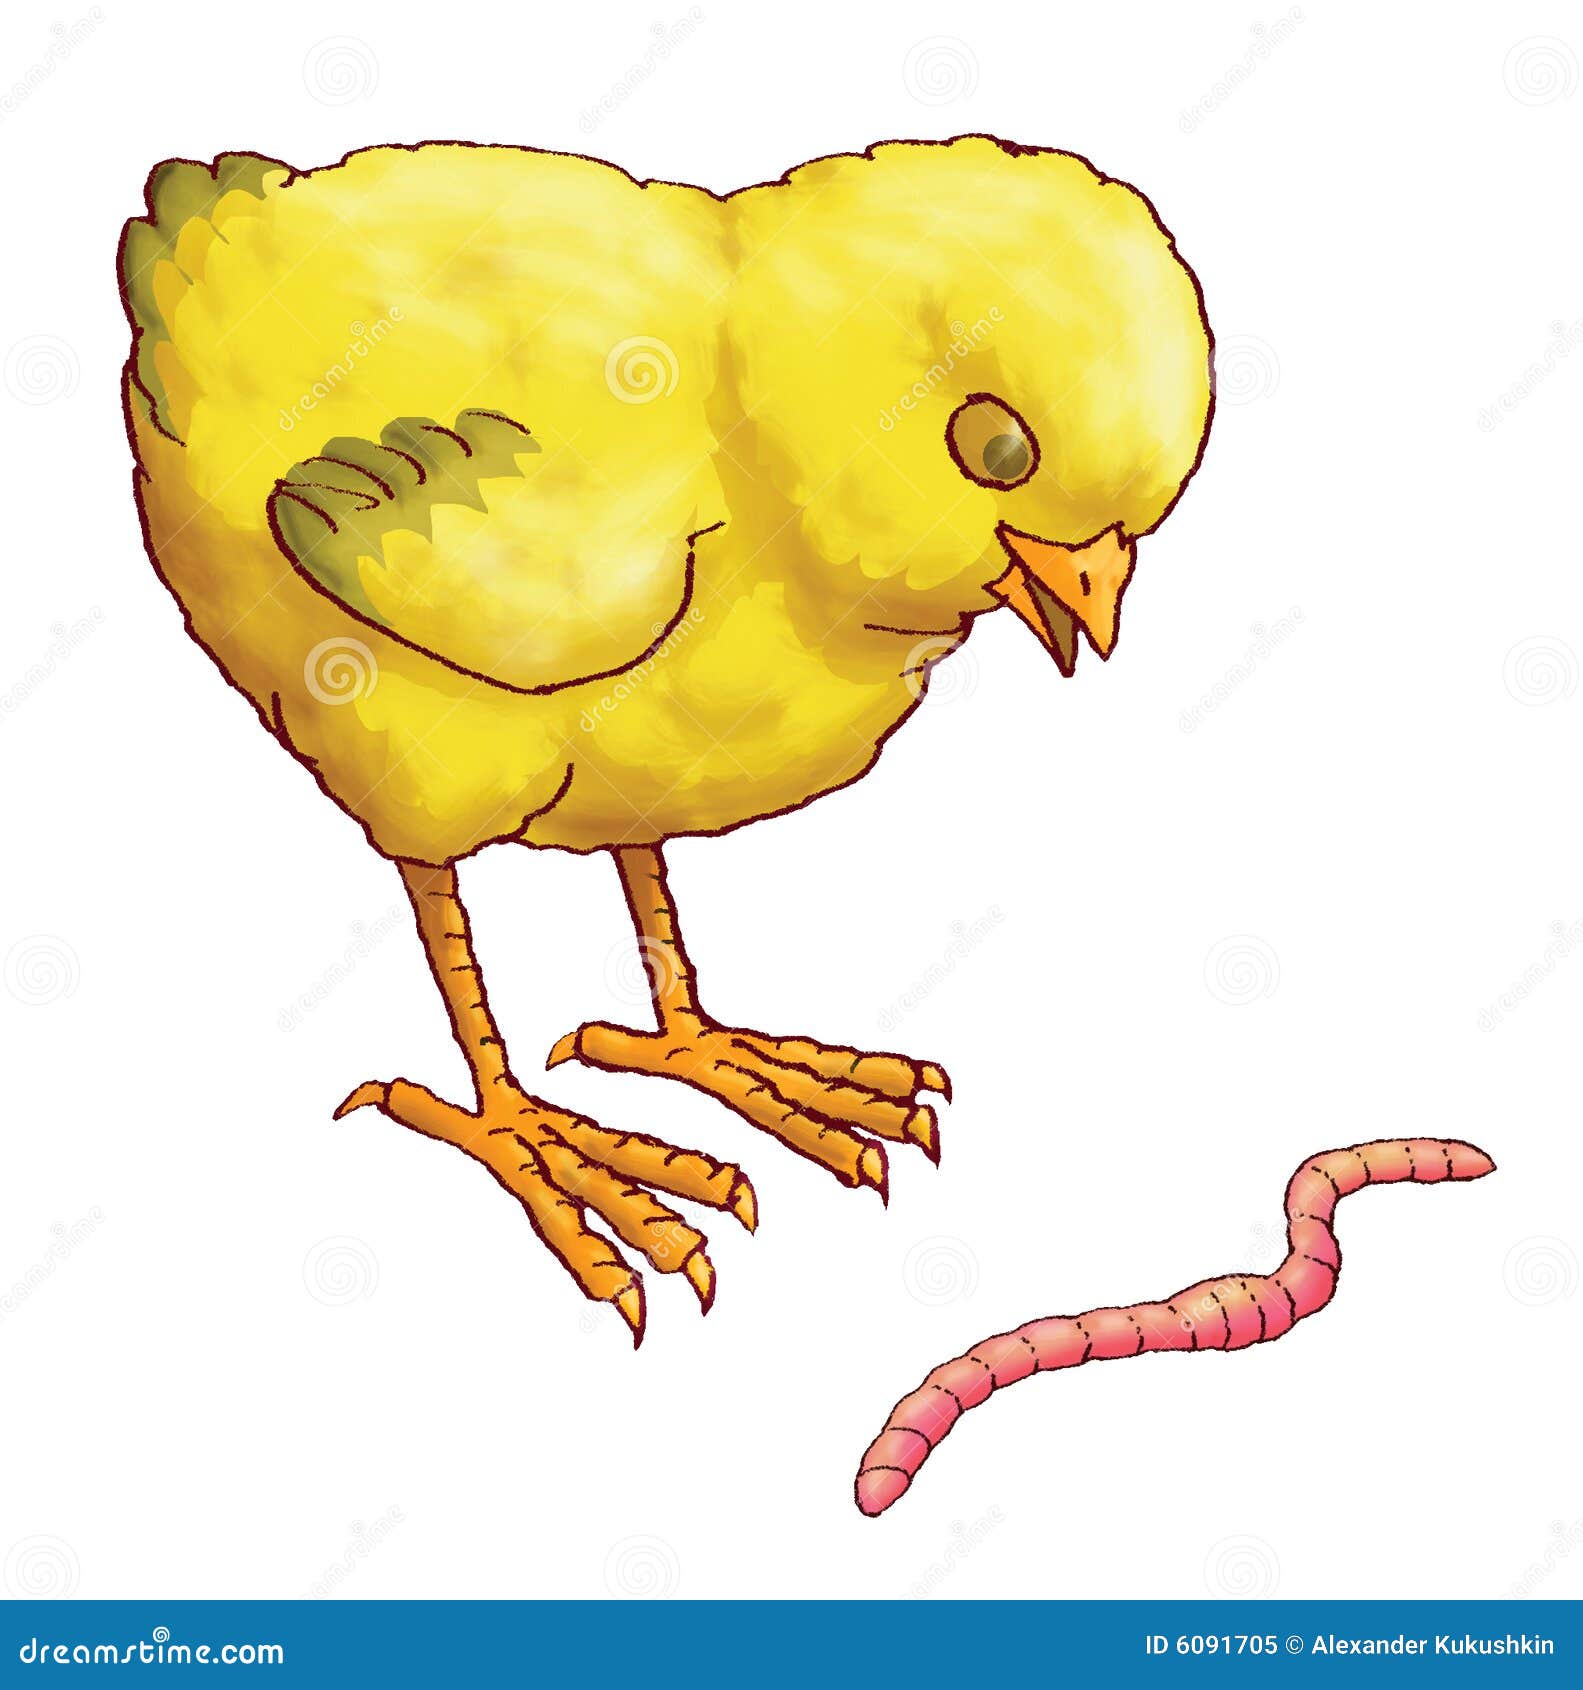 chicken eating clipart - photo #33